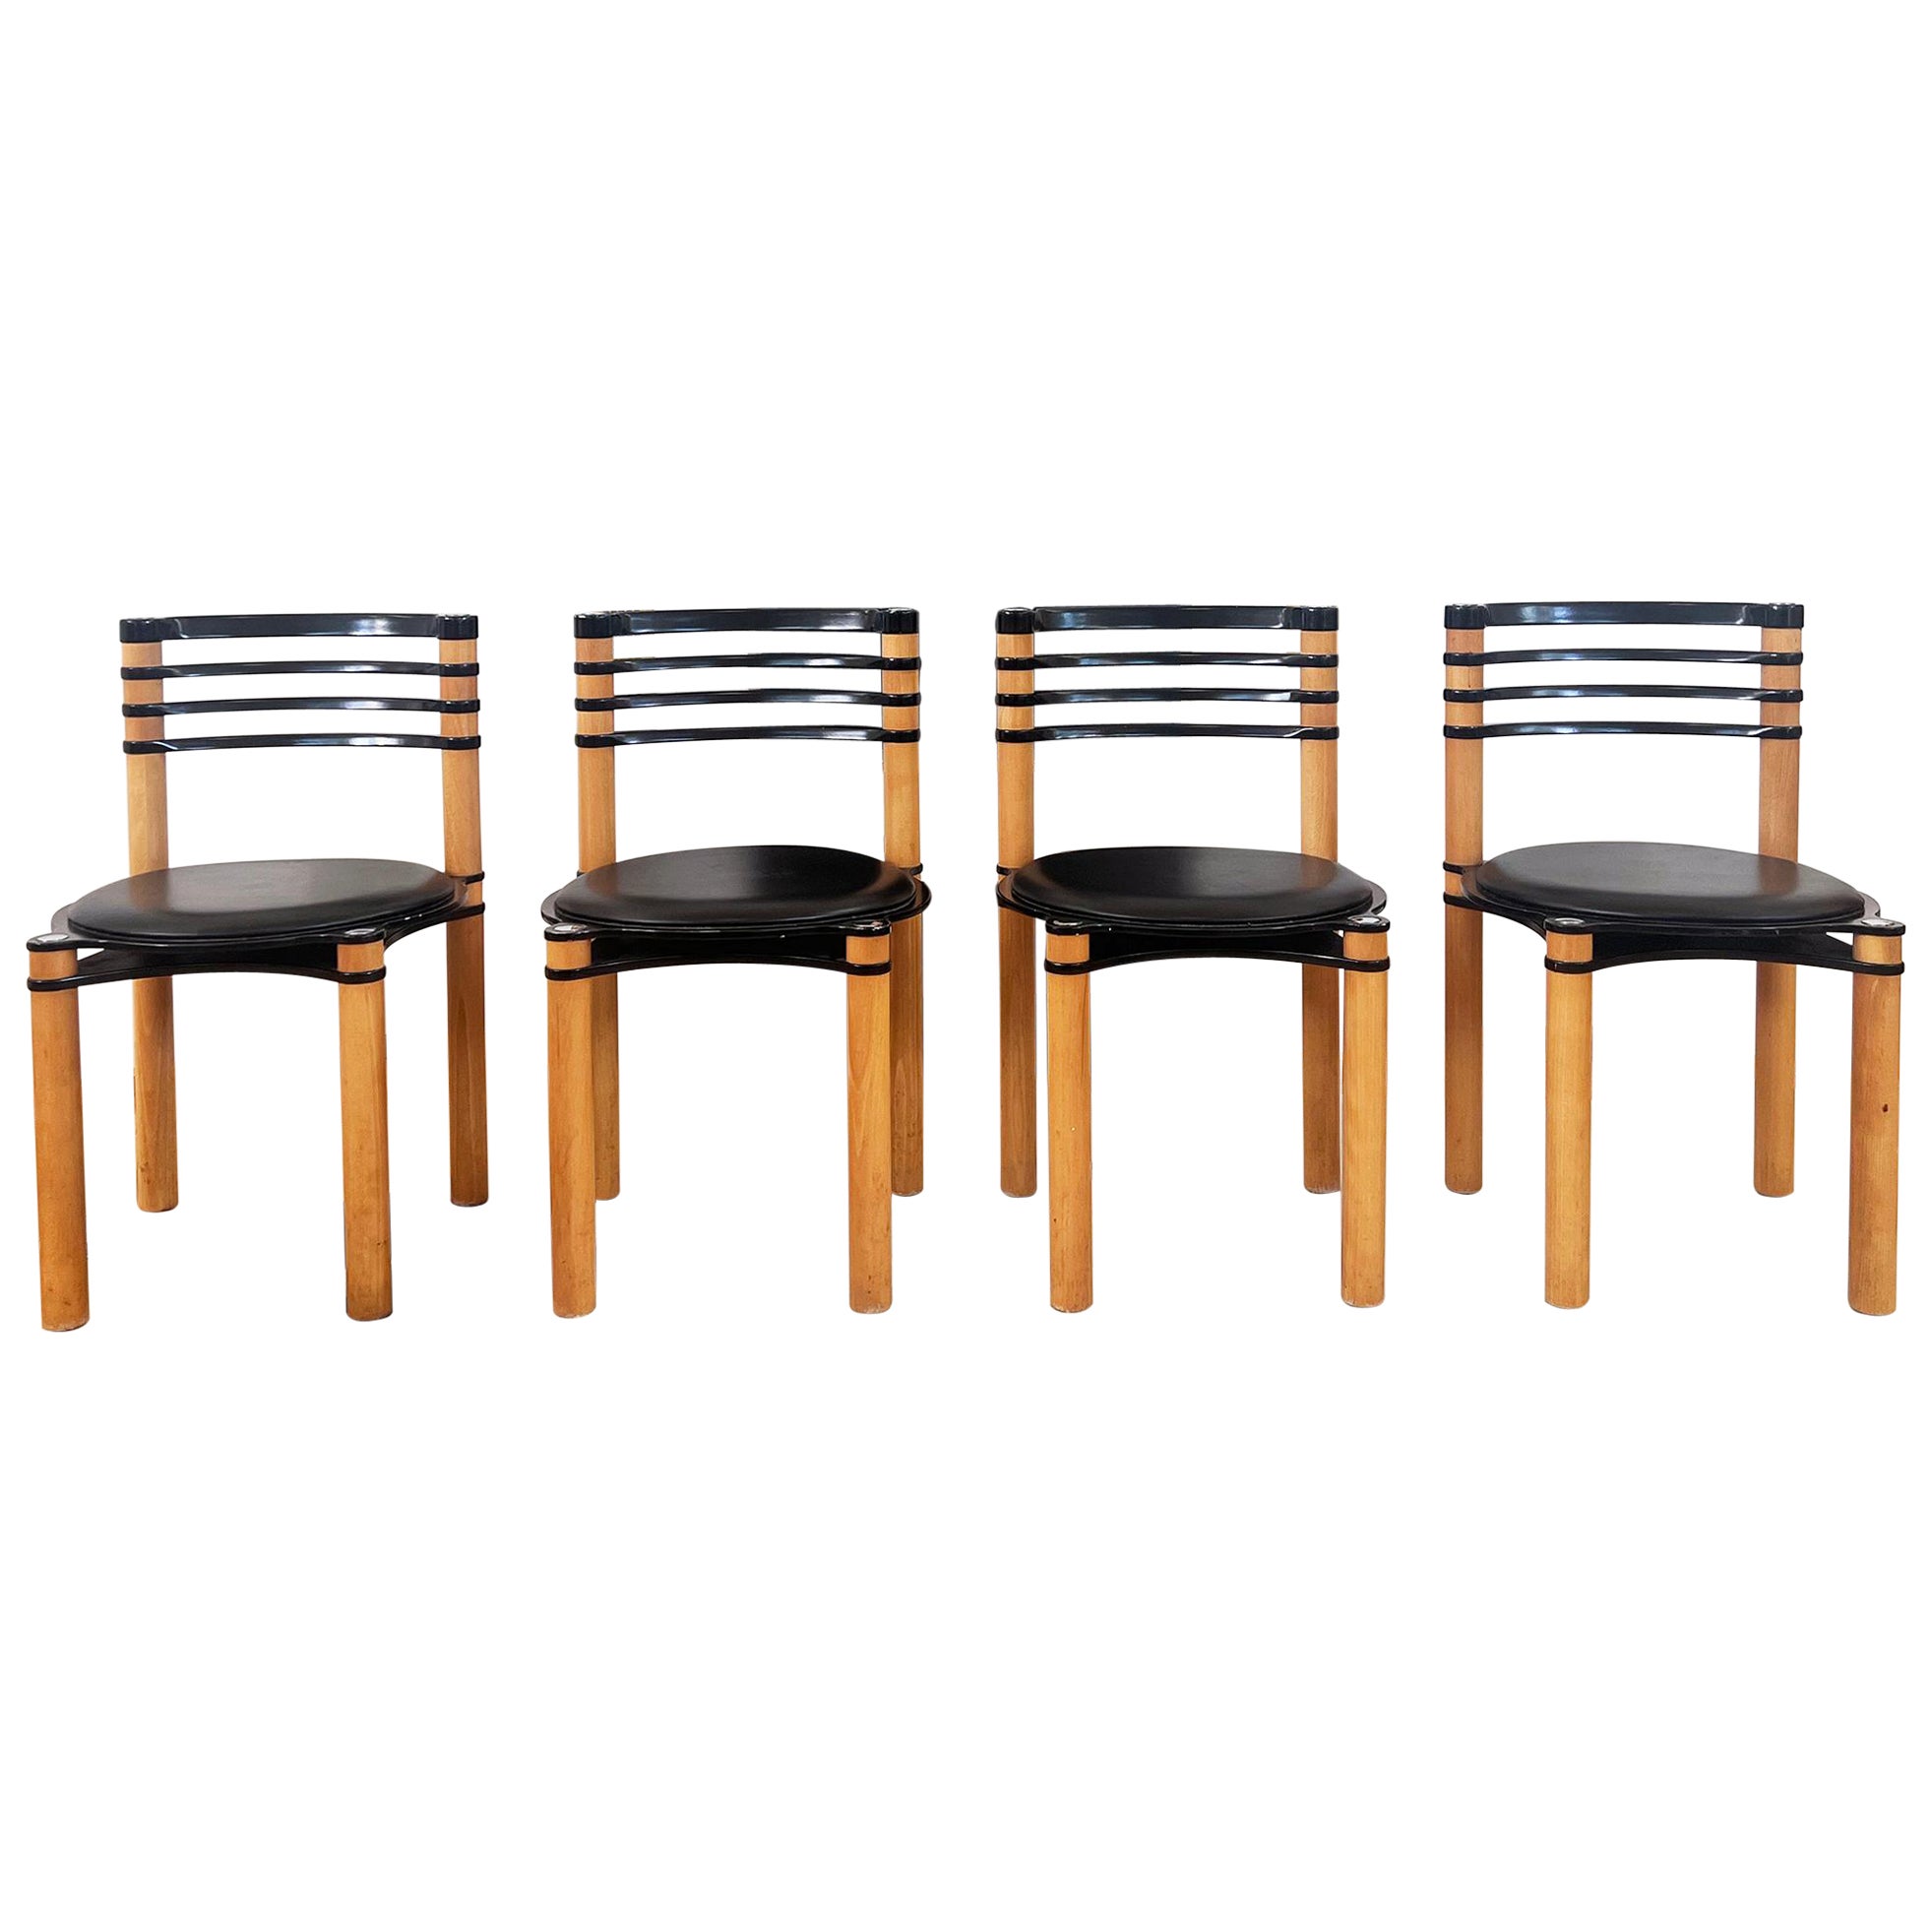 Set of 4 Postmodern Black and Wood Chairs by Kurt Thut for Dietiker, 1980s